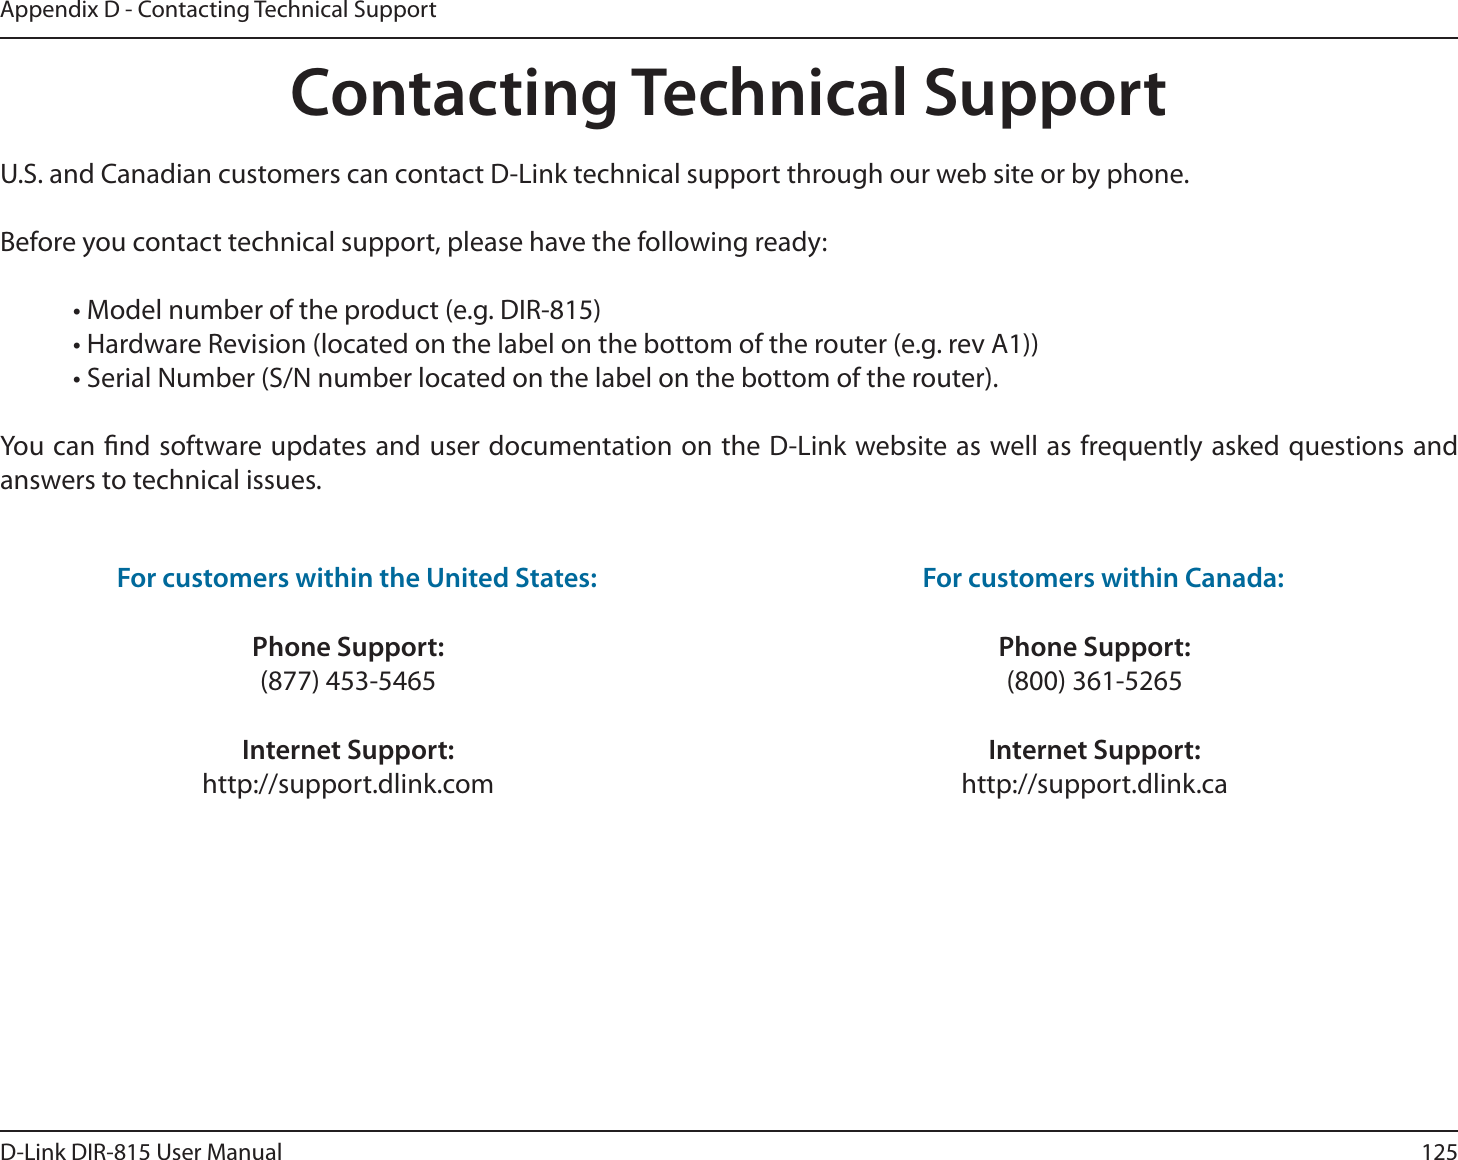 125D-Link DIR-815 User ManualAppendix D - Contacting Technical SupportContacting Technical SupportU.S. and Canadian customers can contact D-Link technical support through our web site or by phone.Before you contact technical support, please have the following ready: t.PEFMOVNCFSPGUIFQSPEVDUFH%*3 t)BSEXBSF3FWJTJPOMPDBUFEPOUIFMBCFMPOUIFCPUUPNPGUIFSPVUFSFHSFW&quot; t4FSJBM/VNCFS4/OVNCFSMPDBUFEPOUIFMBCFMPOUIFCPUUPNPGUIFSPVUFS:PVDBOöOETPGUXBSFVQEBUFTBOEVTFSEPDVNFOUBUJPOPOUIF%-JOLXFCTJUFBTXFMMBTGSFRVFOUMZBTLFERVFTUJPOTBOEanswers to technical issues.For customers within the United States: Phone Support:(877) 453-5465Internet Support:http://support.dlink.com For customers within Canada: Phone Support:(800) 361-5265Internet Support:http://support.dlink.ca 